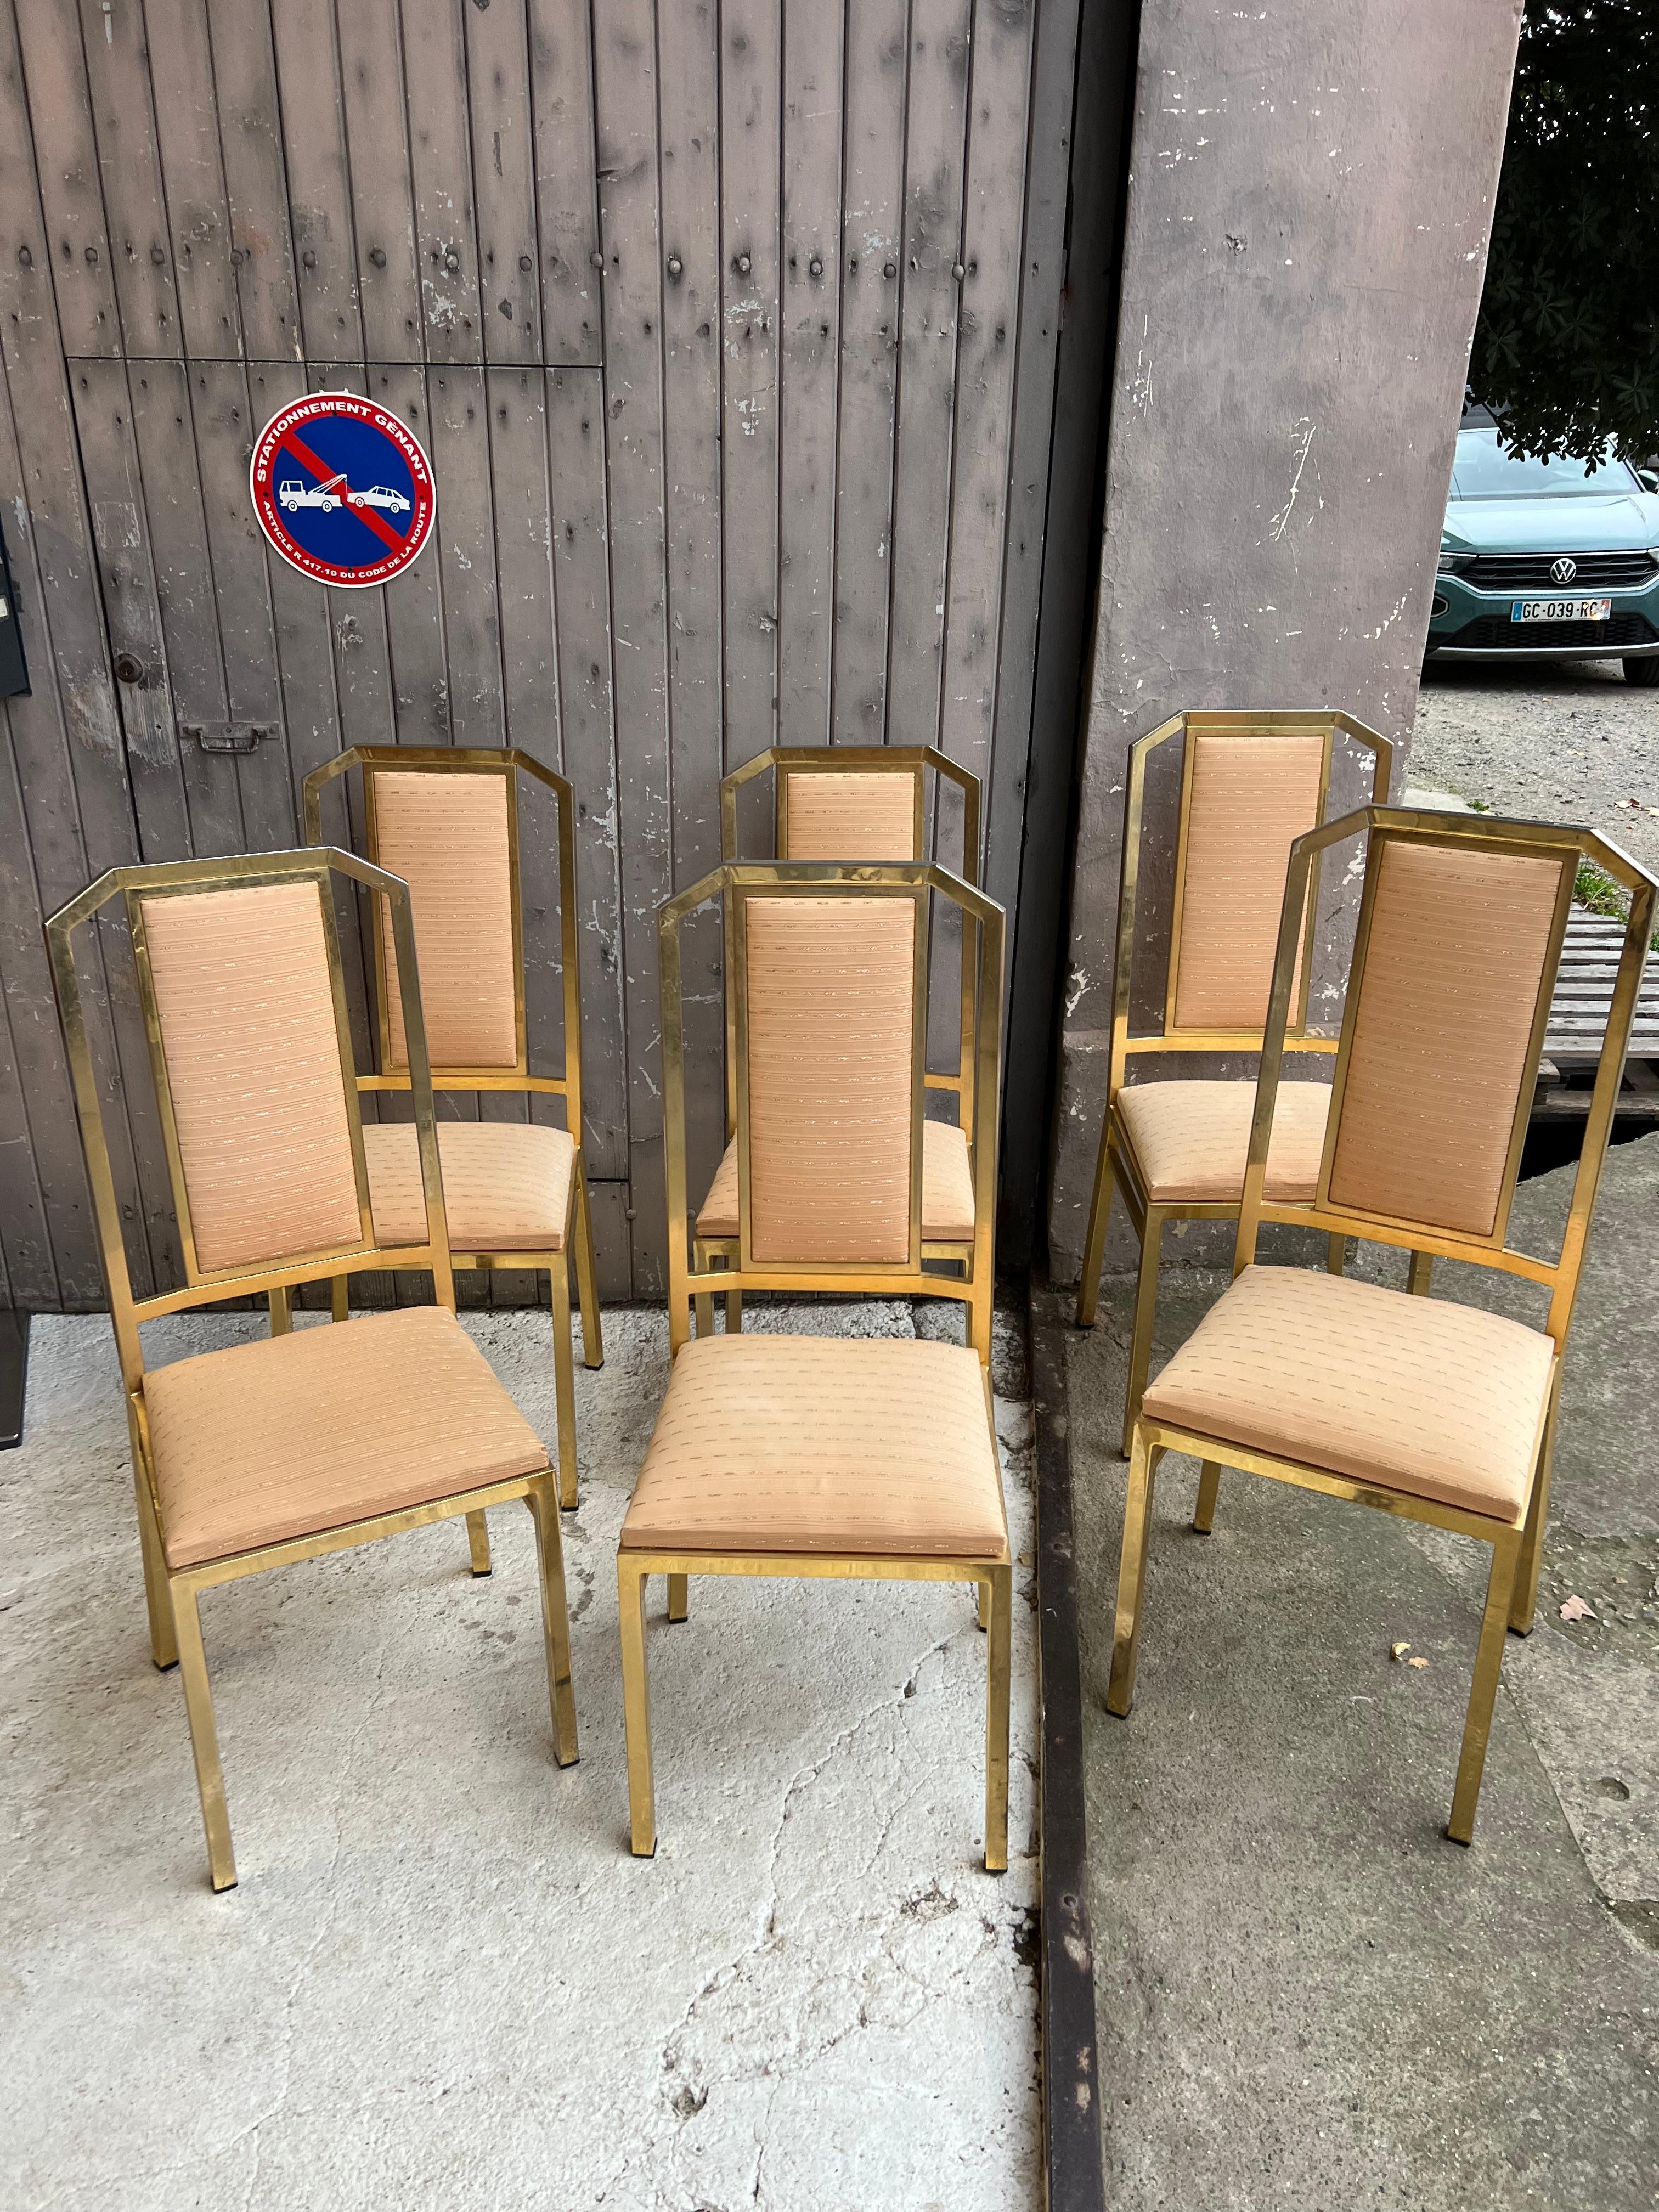 Jean-Claude Mahey (born in 1944). Six dining room chairs with square section tubular structure in gold metal, seat and back in mouse ivory textile trim. Modern work in the Art Deco taste. Seat height: 52 cm.

